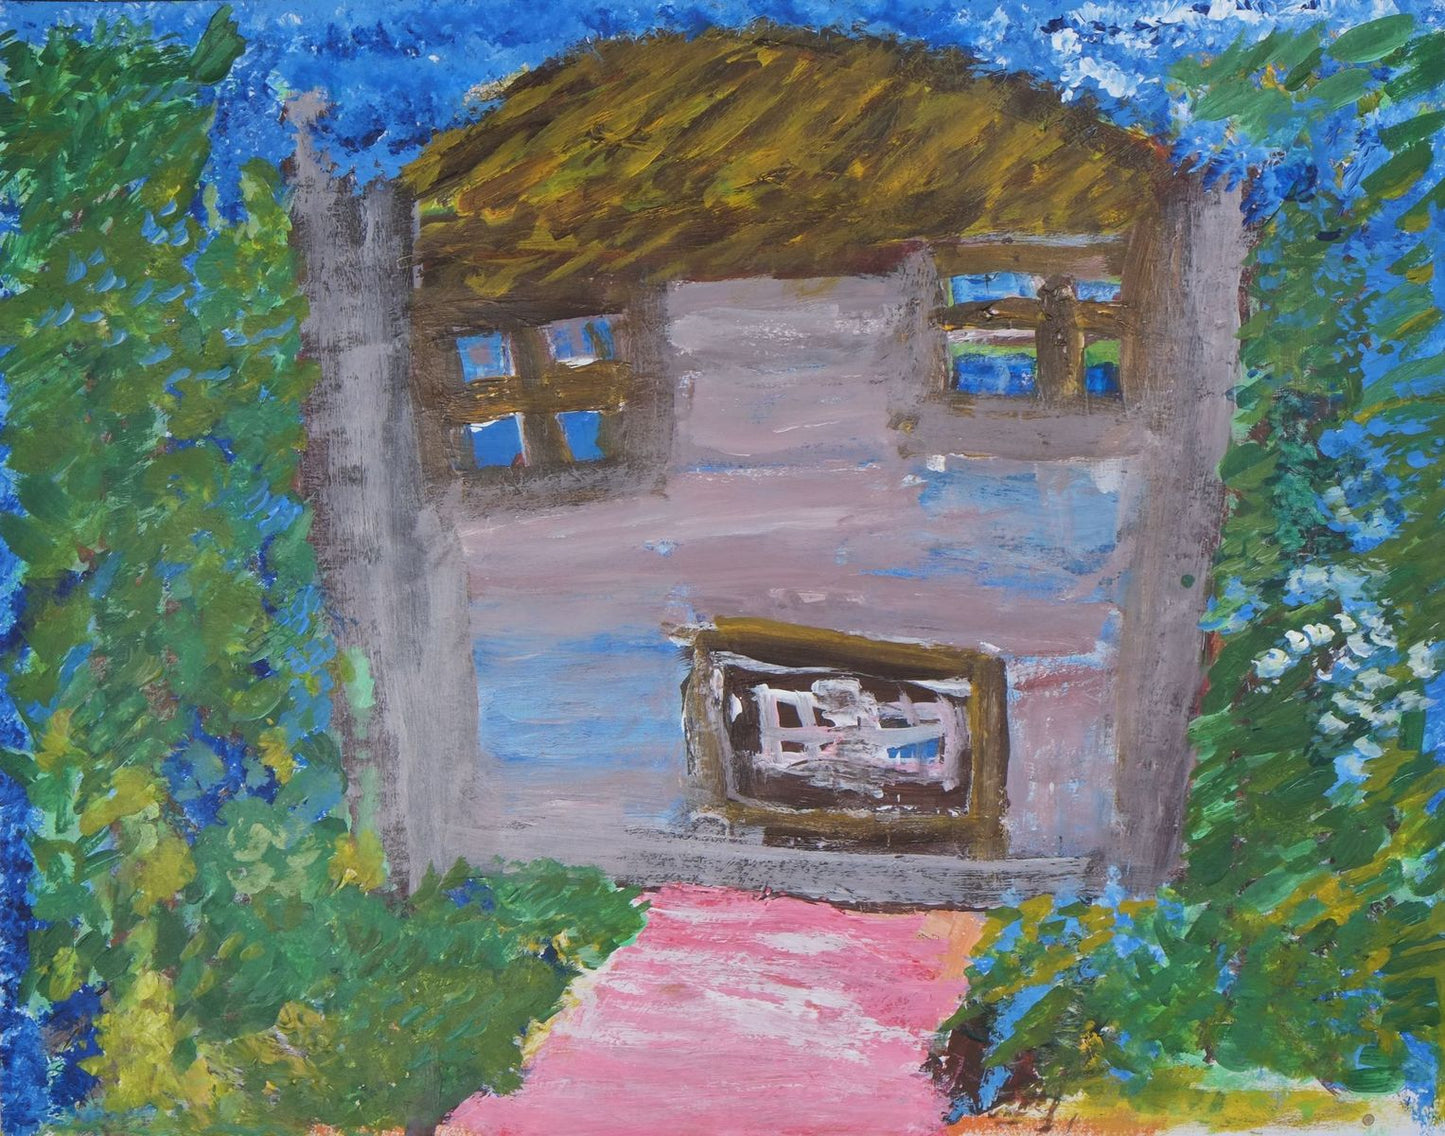 Acrylic on paper depicting a gray house with a straw roof and pink pathway with green grass and a blue sky